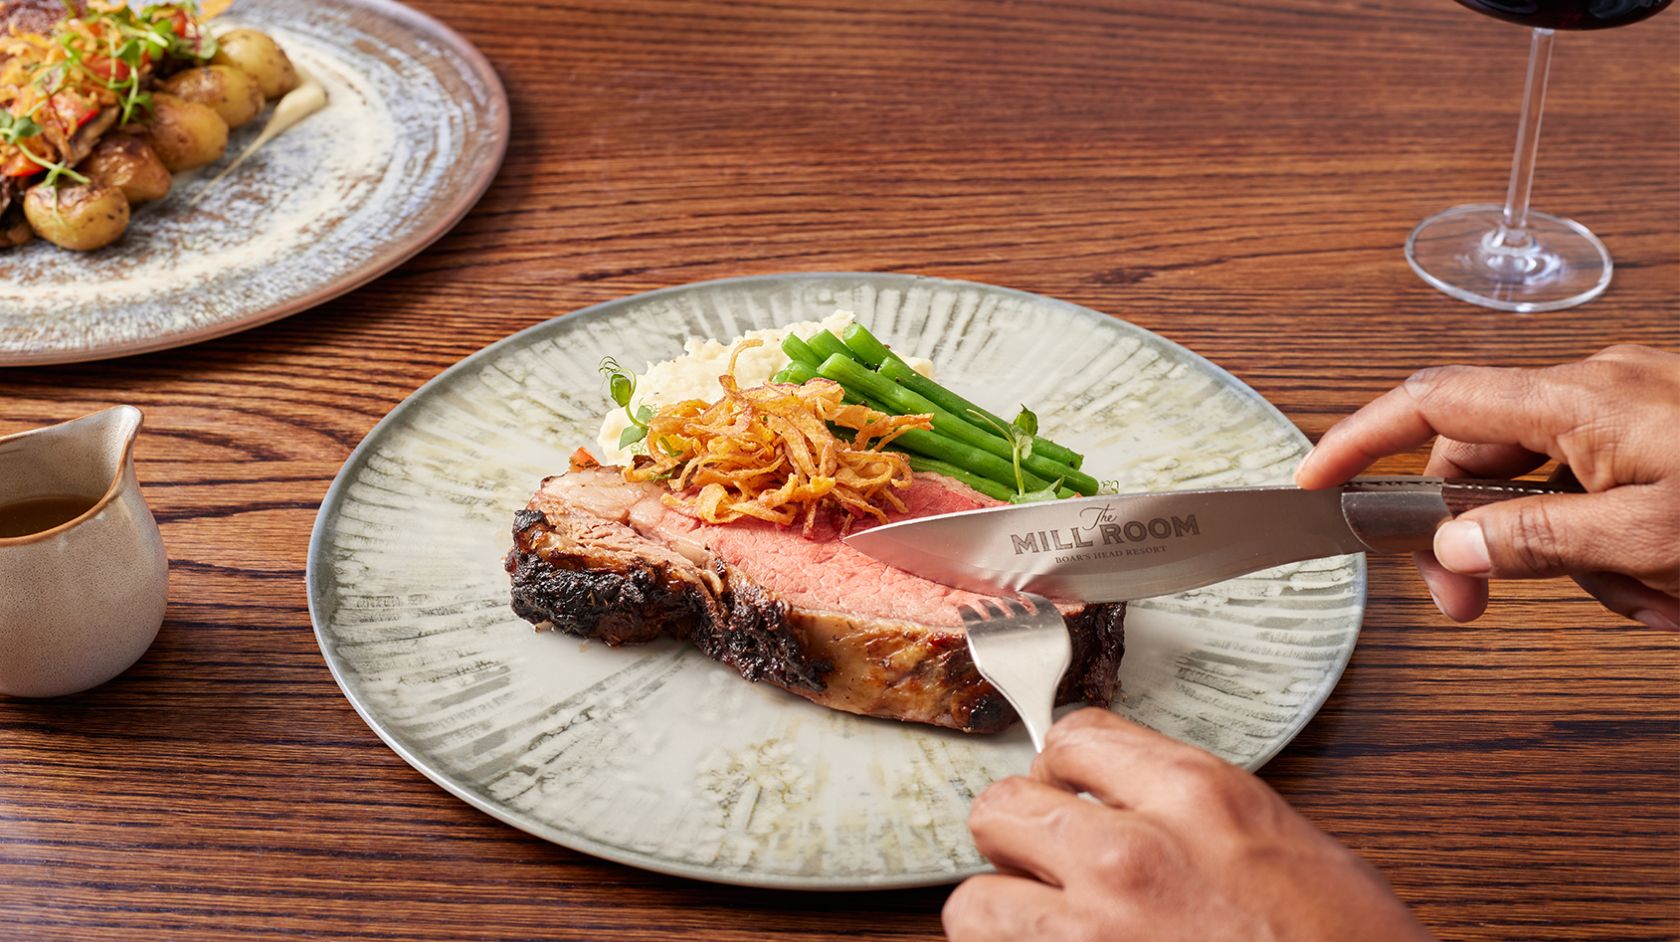 A Person Cutting A Piece Of Meat With A Knife